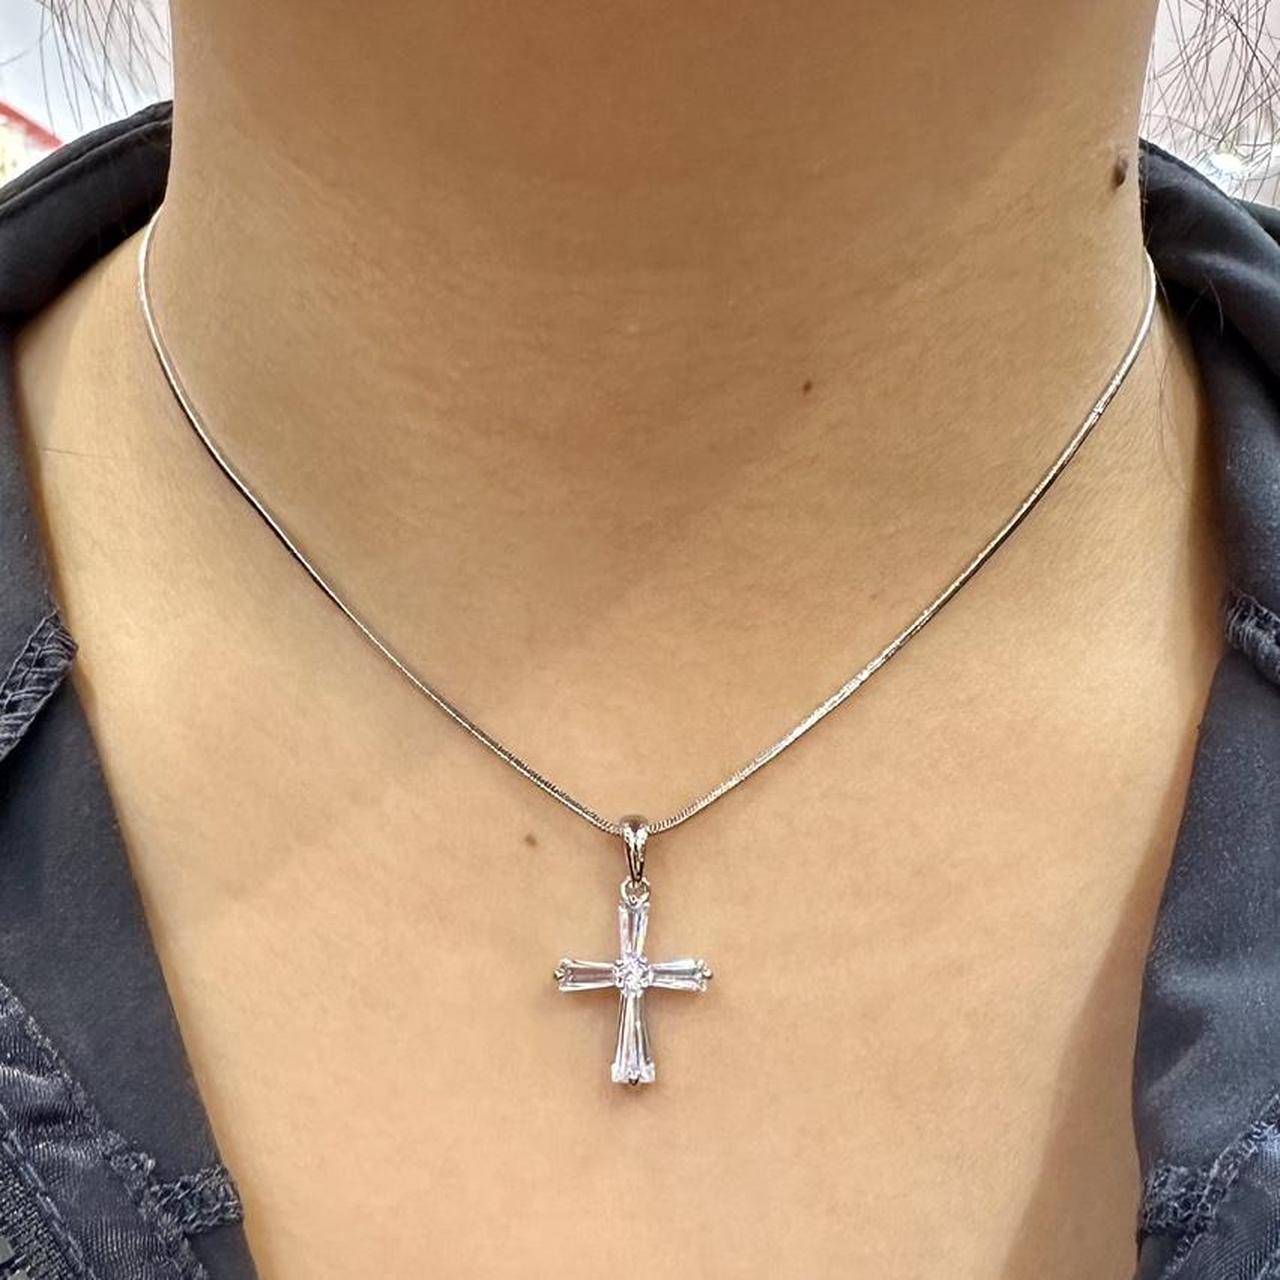 Jesus Crystal Cross Mens Gold Cross Pendant For Men Gold, Silver, And Black  Fashion Jewelry On Sale From Harden_vol2, $9.54 | DHgate.Com